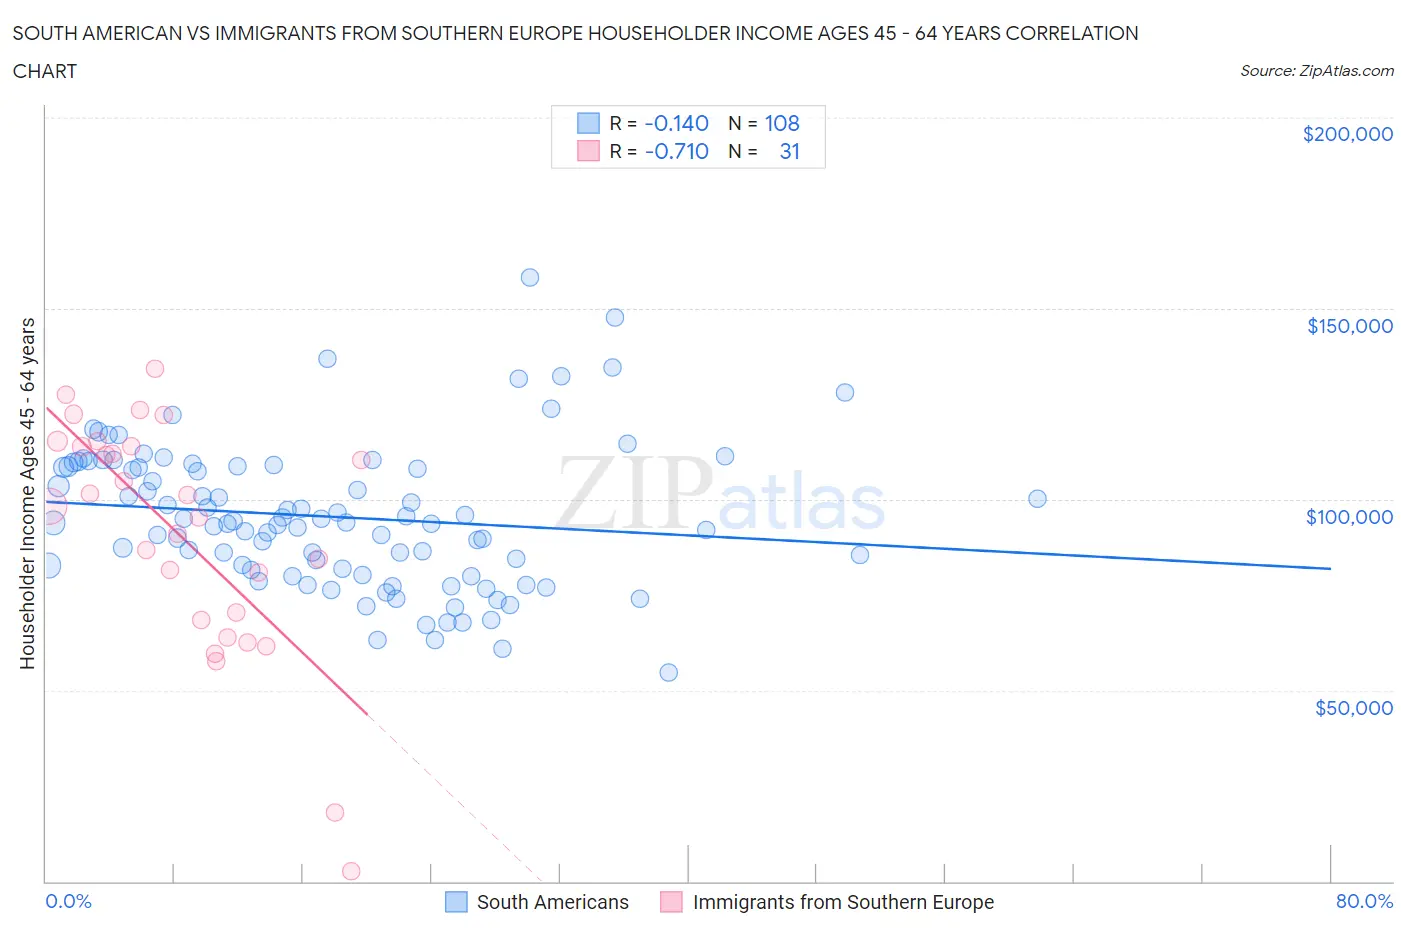 South American vs Immigrants from Southern Europe Householder Income Ages 45 - 64 years